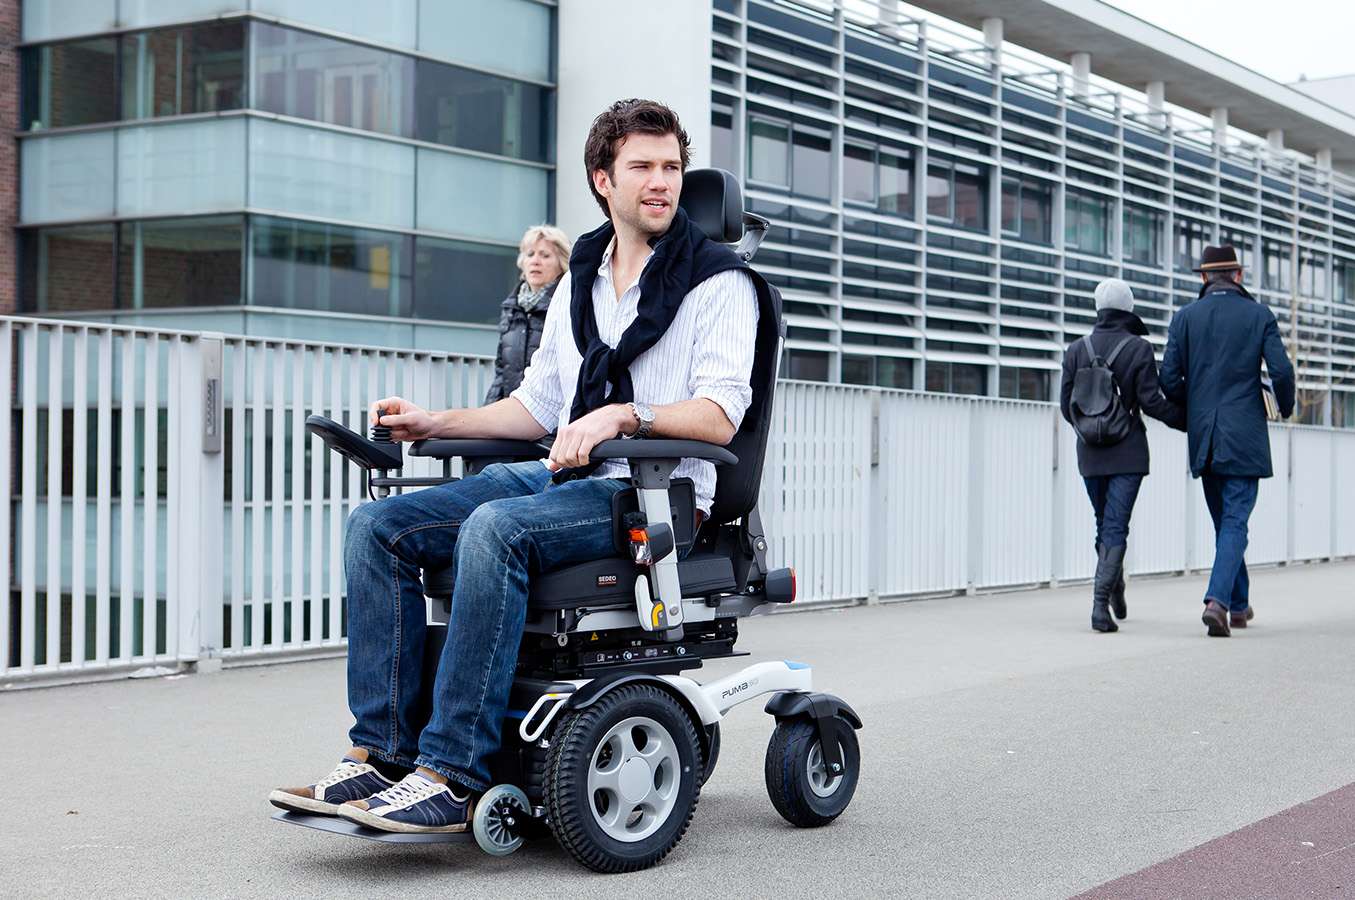 A man sat in an electric wheelchair on an inner city pavement